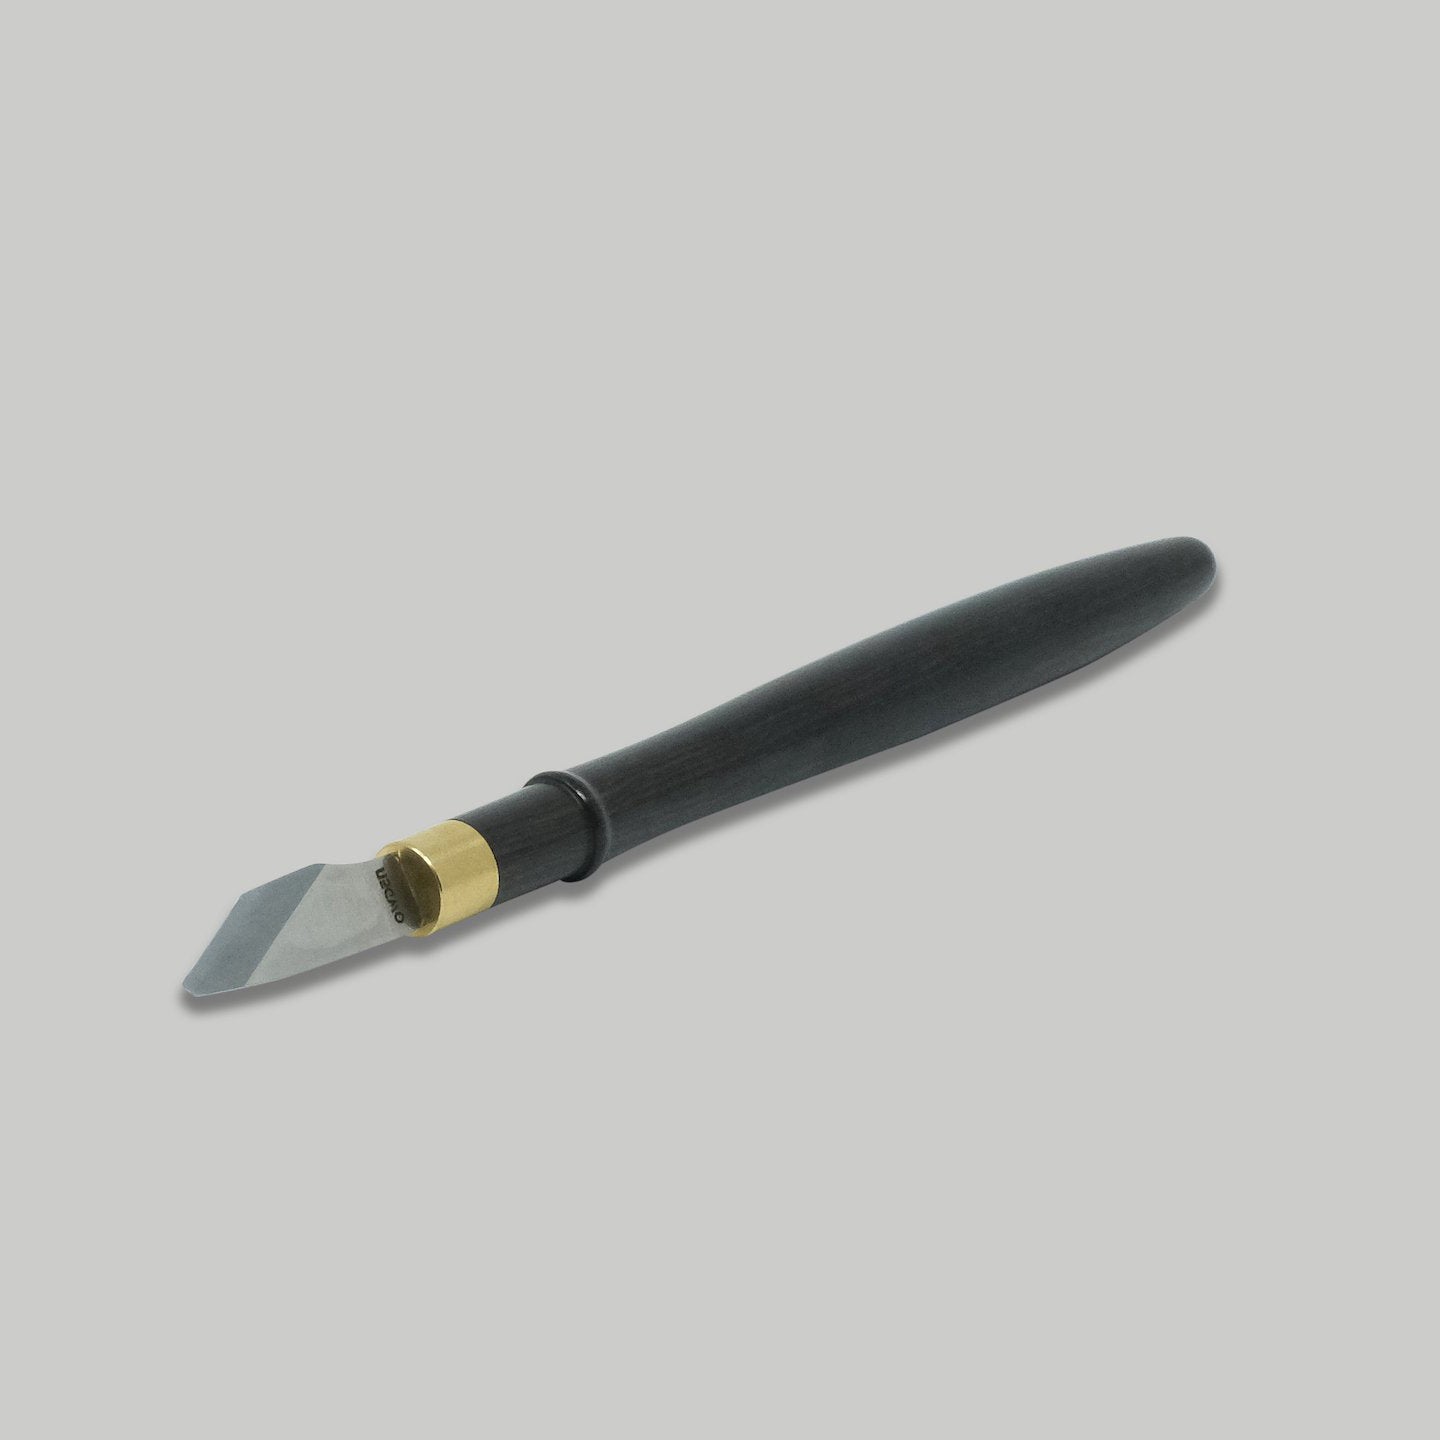 OWDEN Carving knife